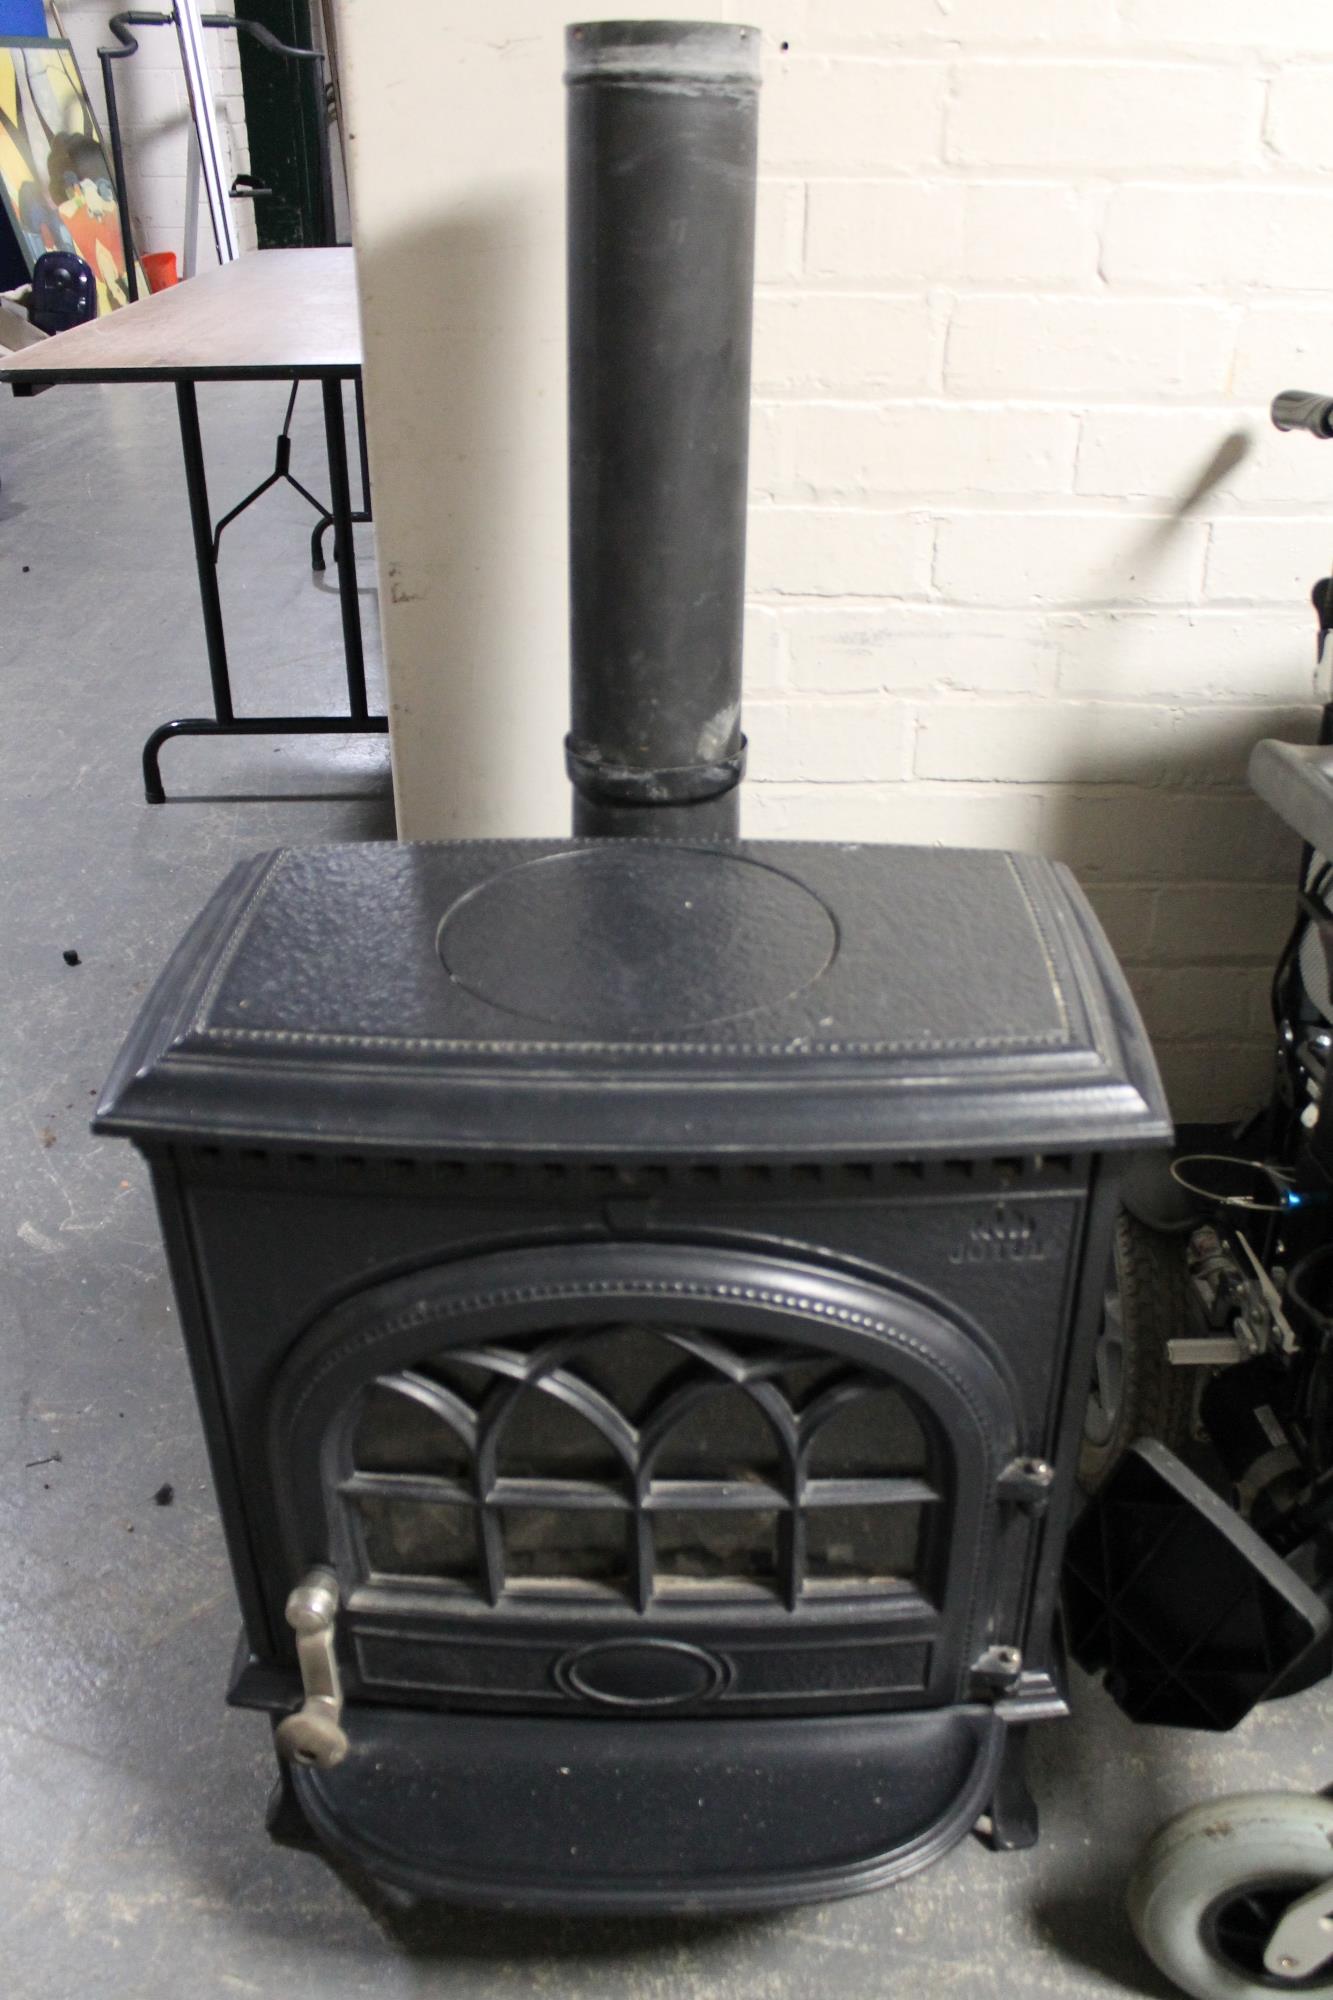 A Jotul gas fire in the form of a log burner P8552